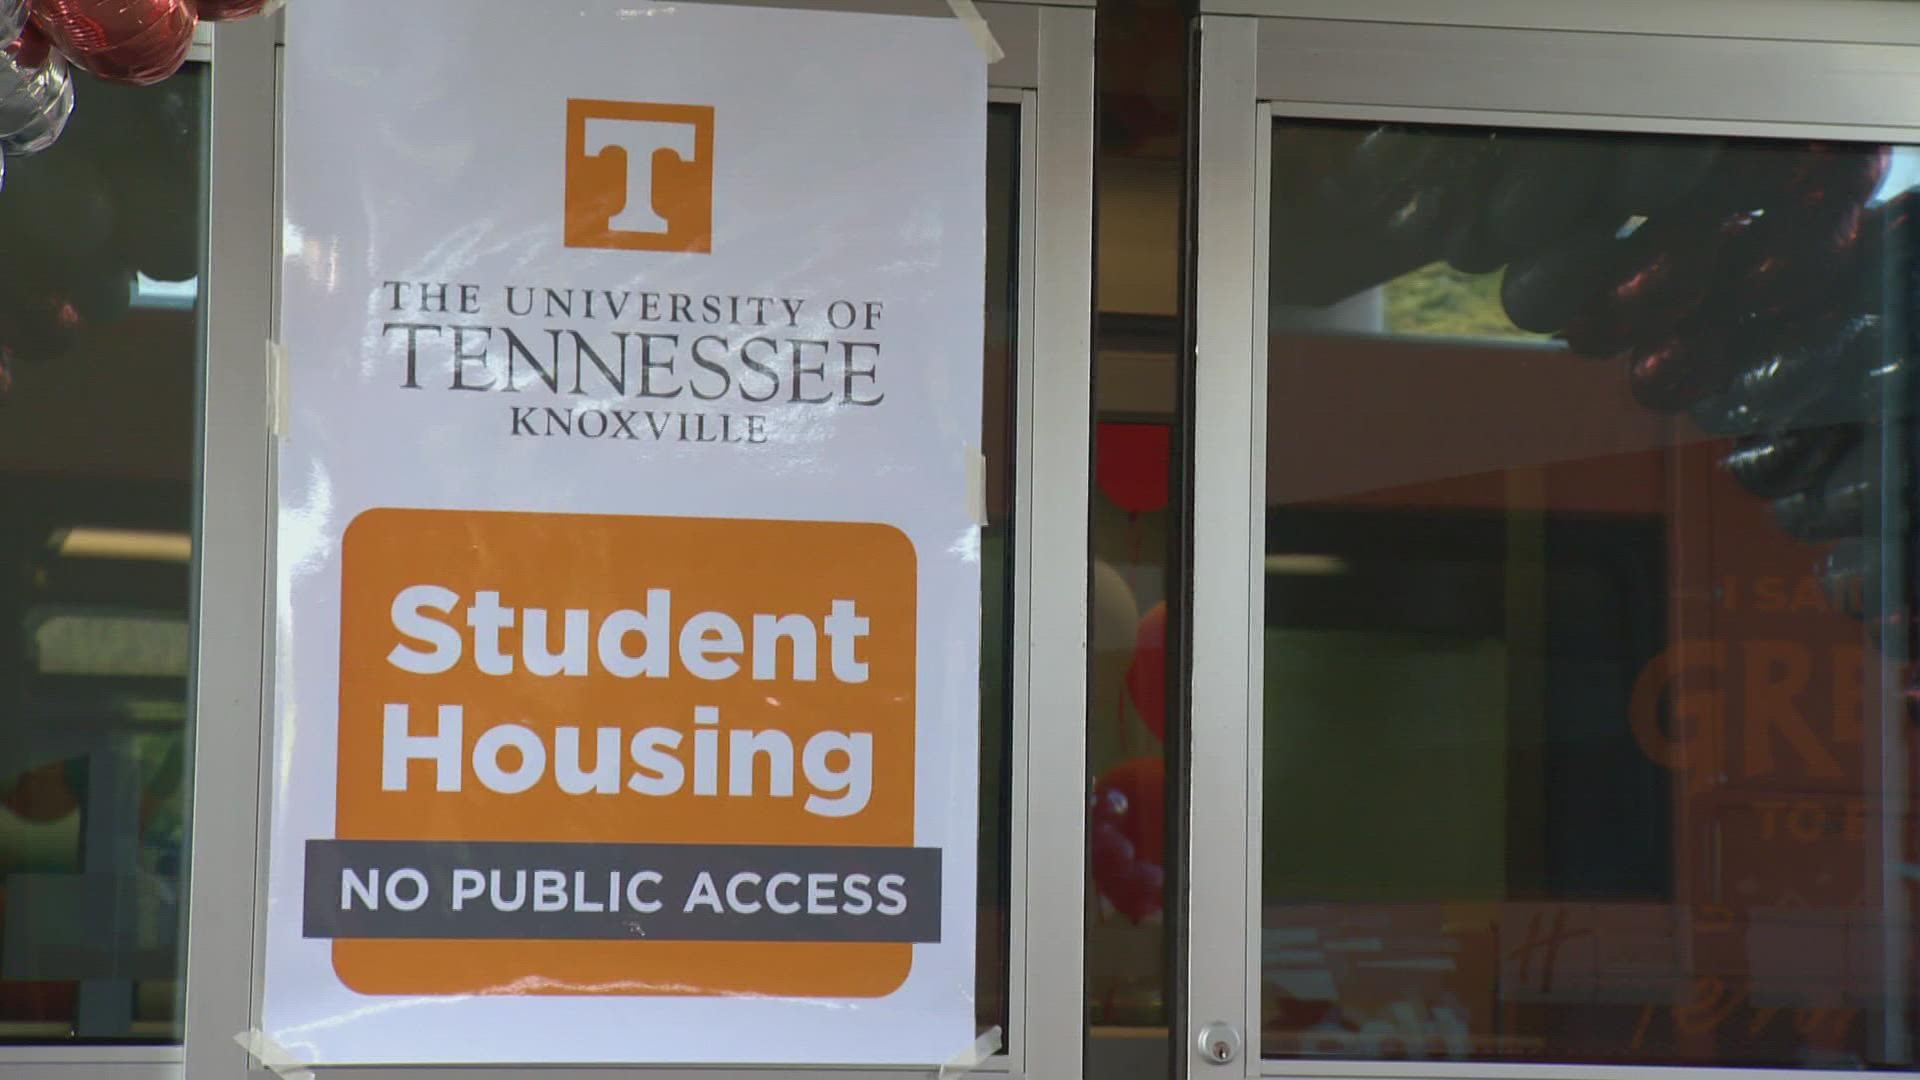 The University of Tennessee is welcoming its largest student body ever, but it doesn't have enough housing on campus for everyone who wants to live there.